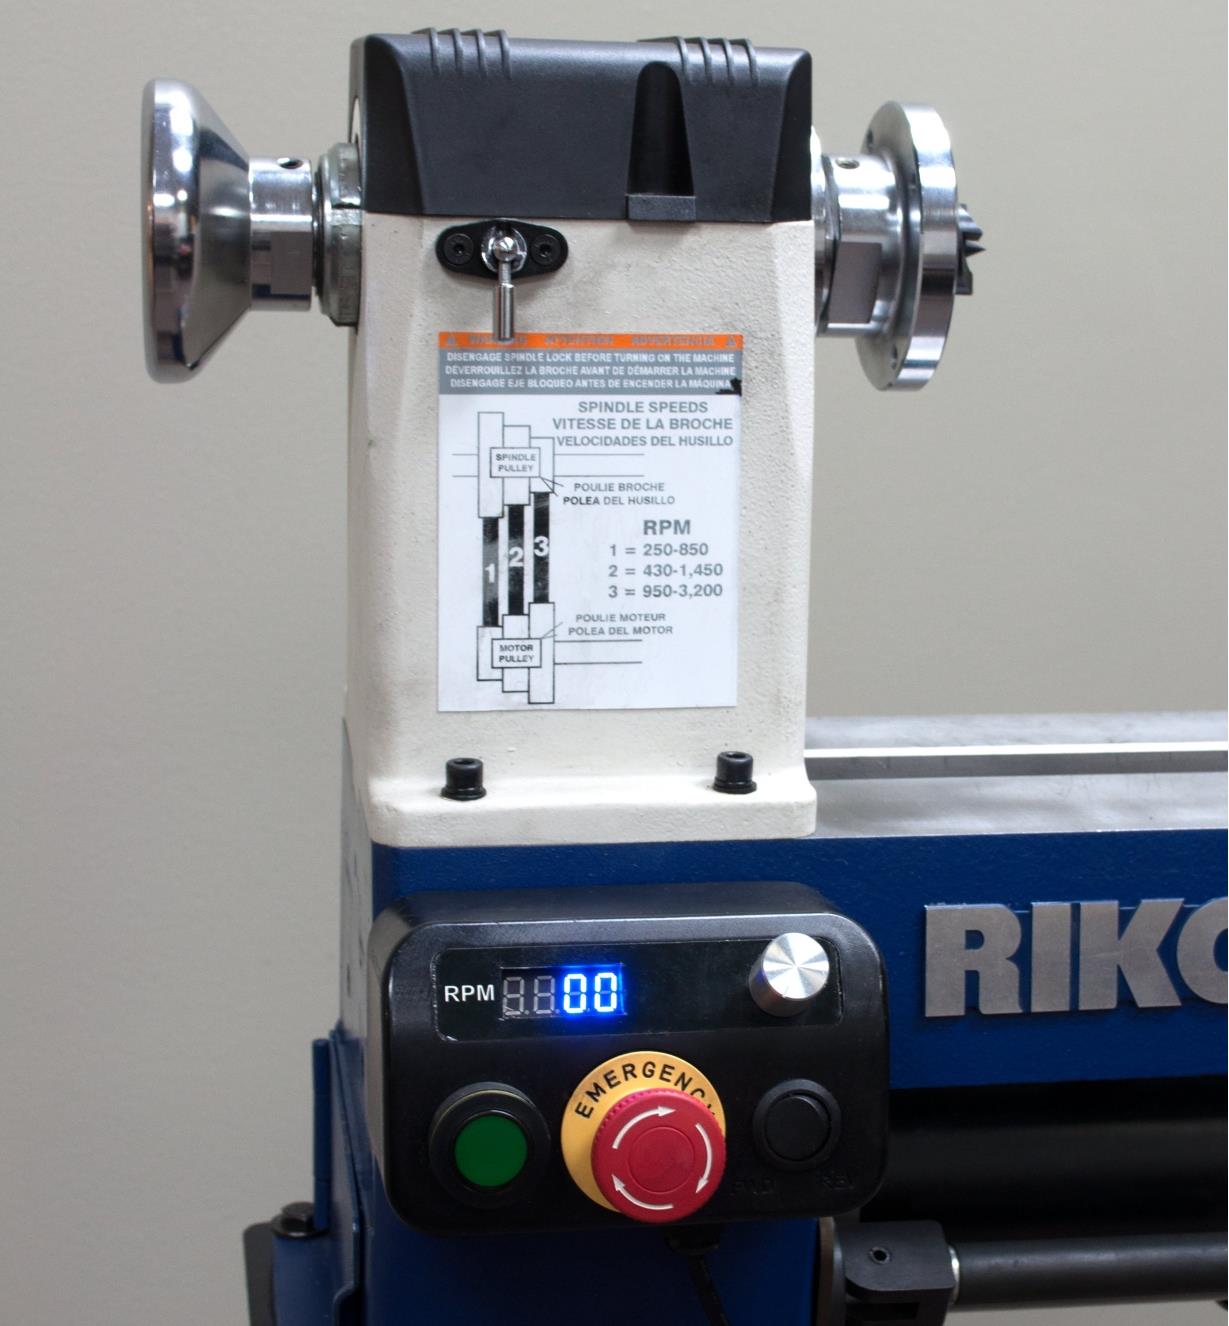 A close view of the Rikon 70-150VSR Midi lathe’s magnetic control box mounted on the lathe bed